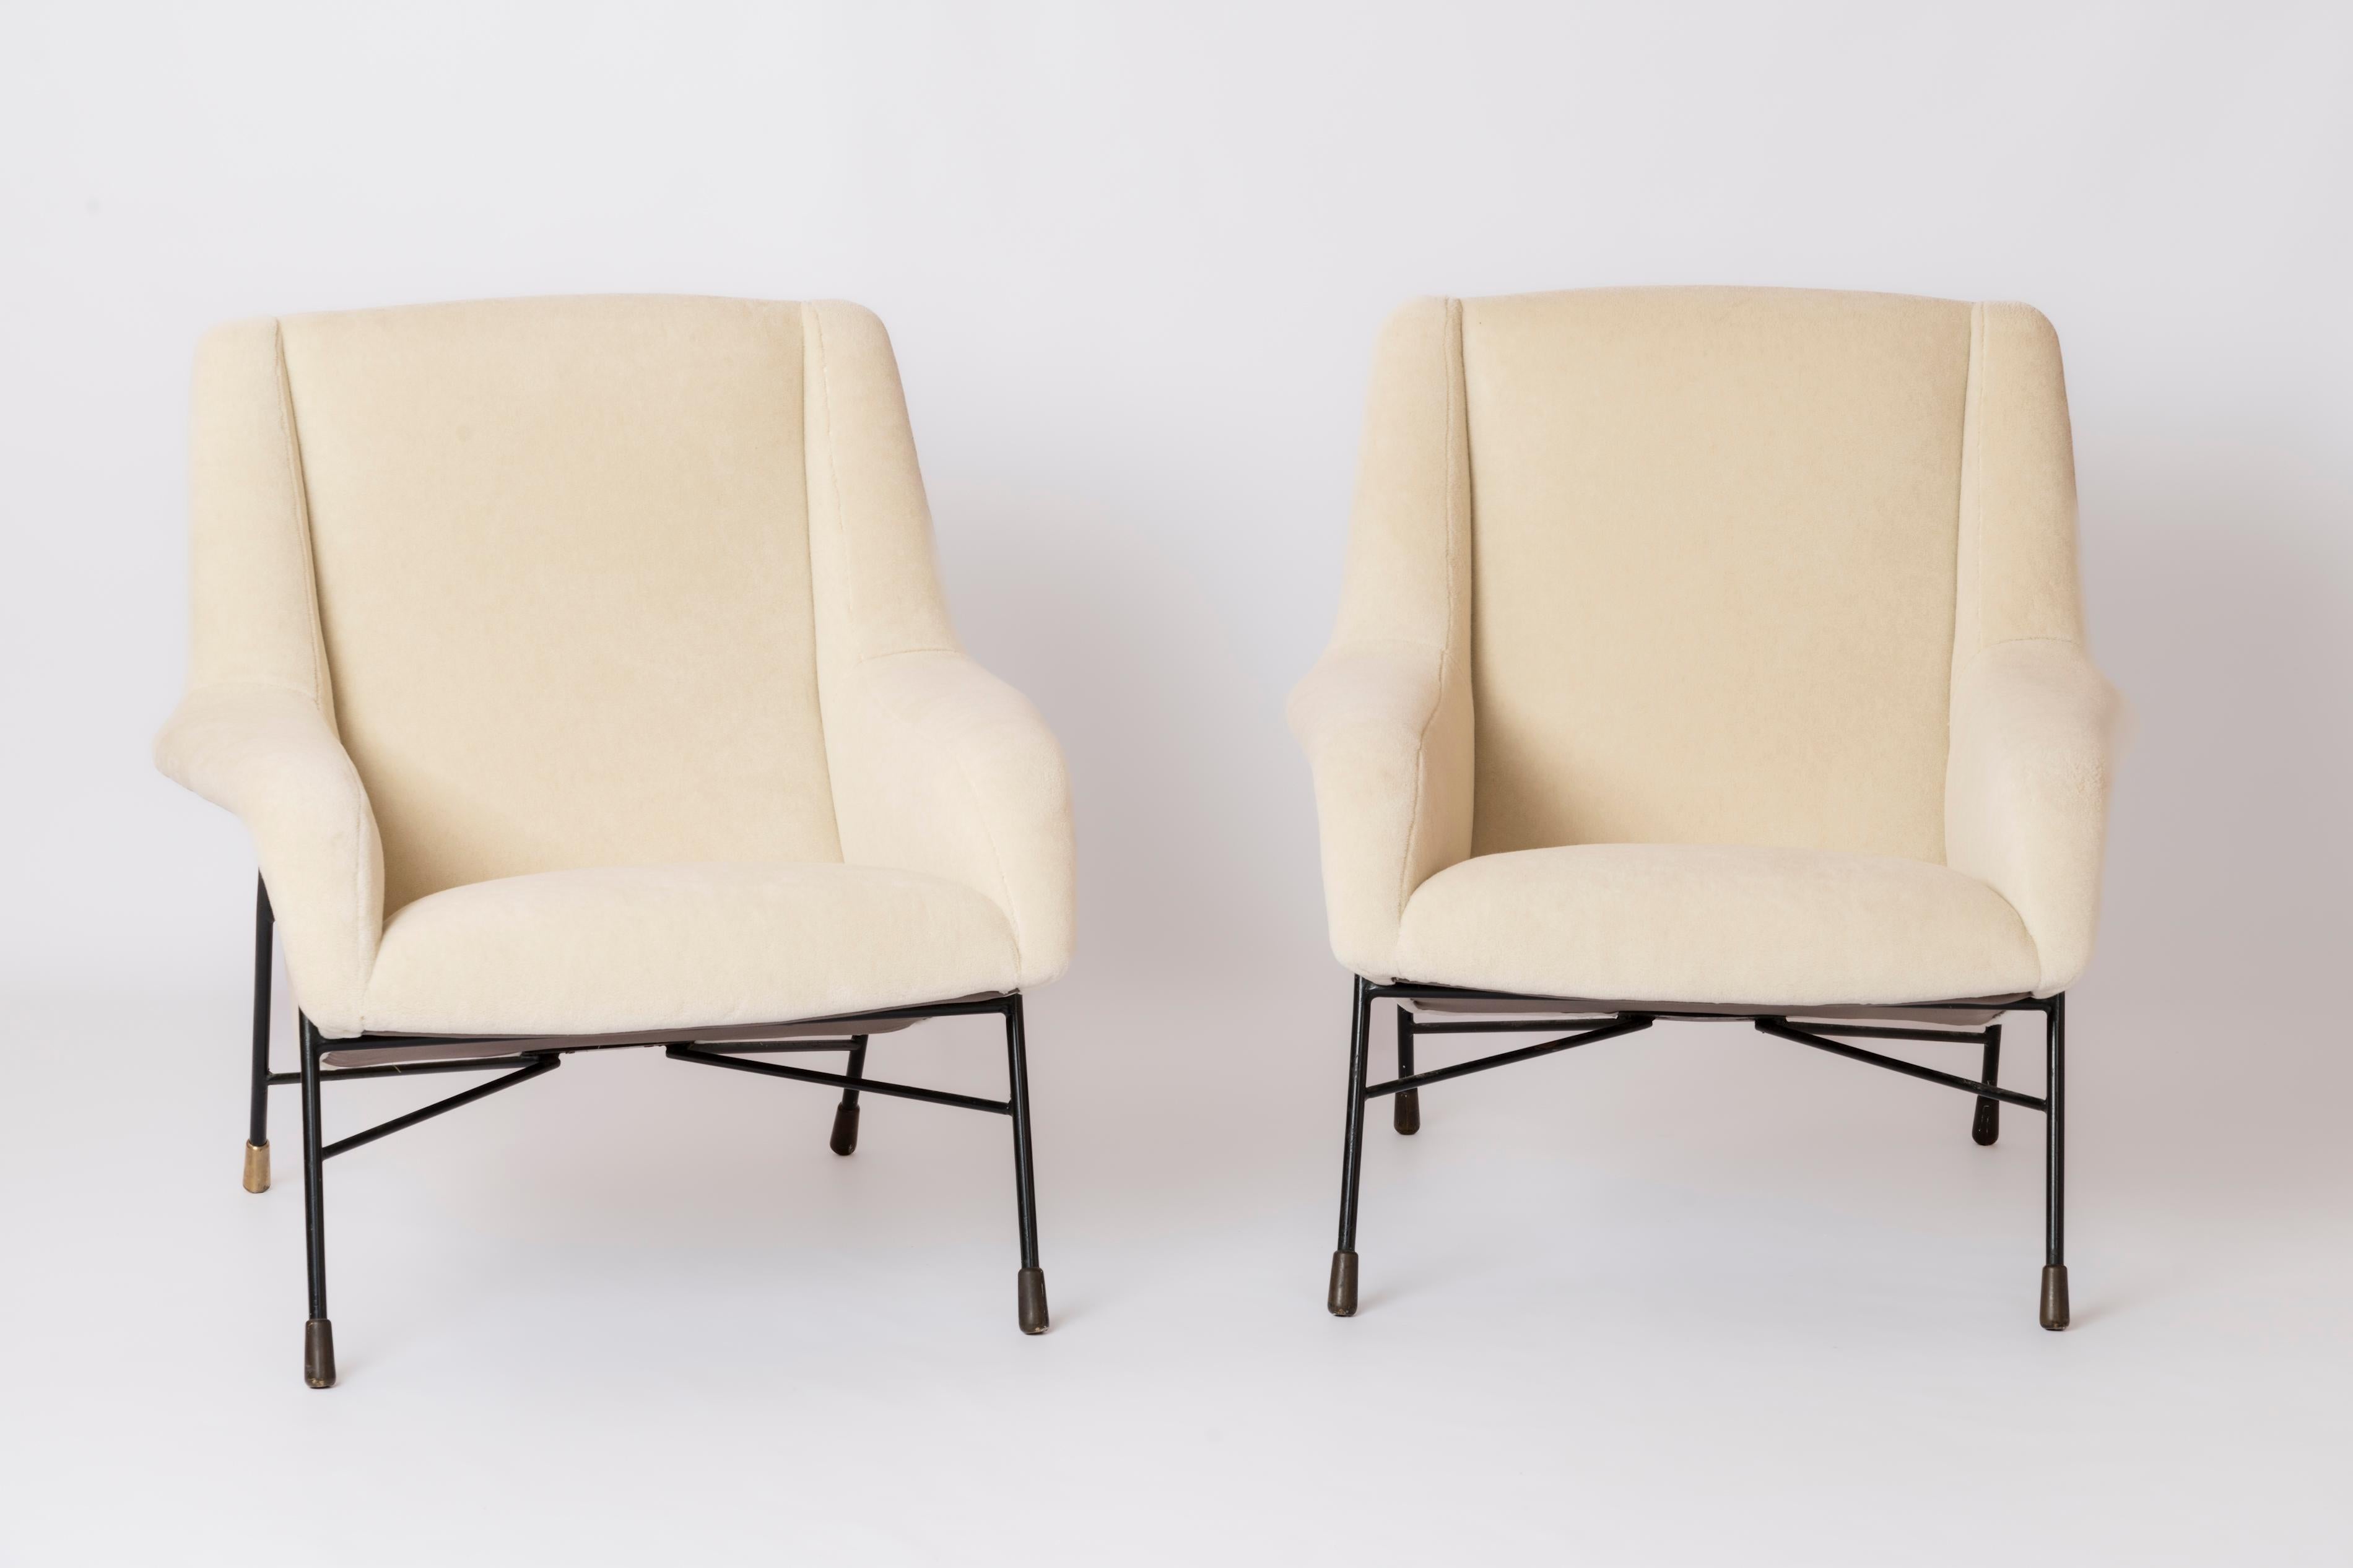 Mid-Century Modern Pair of Cream Mohair Armchairs by Alfred Hendrickx for Belform - Belgium, 1958 For Sale